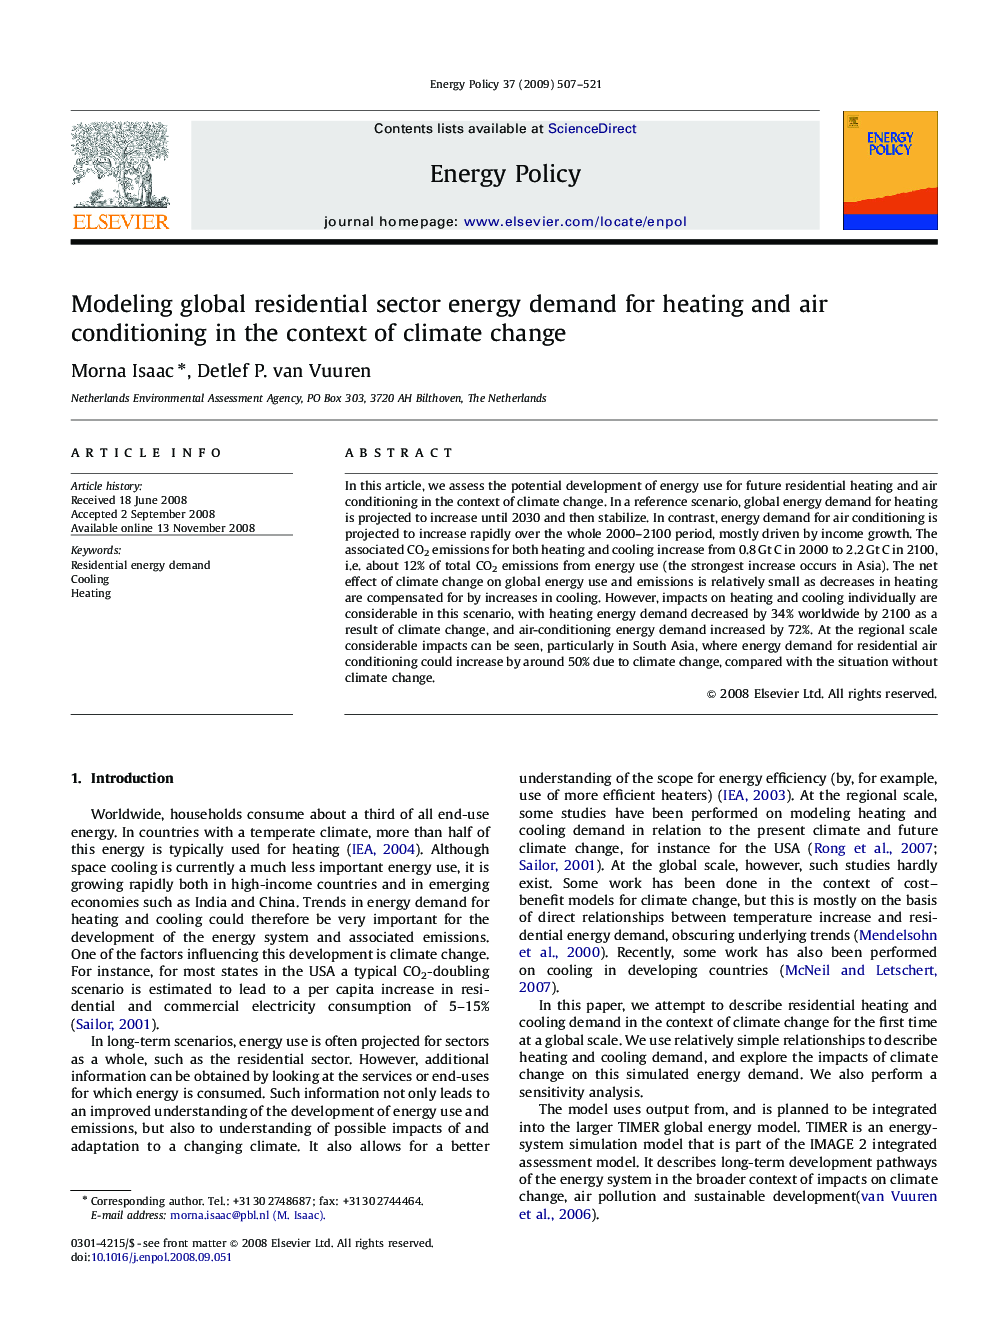 Modeling global residential sector energy demand for heating and air conditioning in the context of climate change